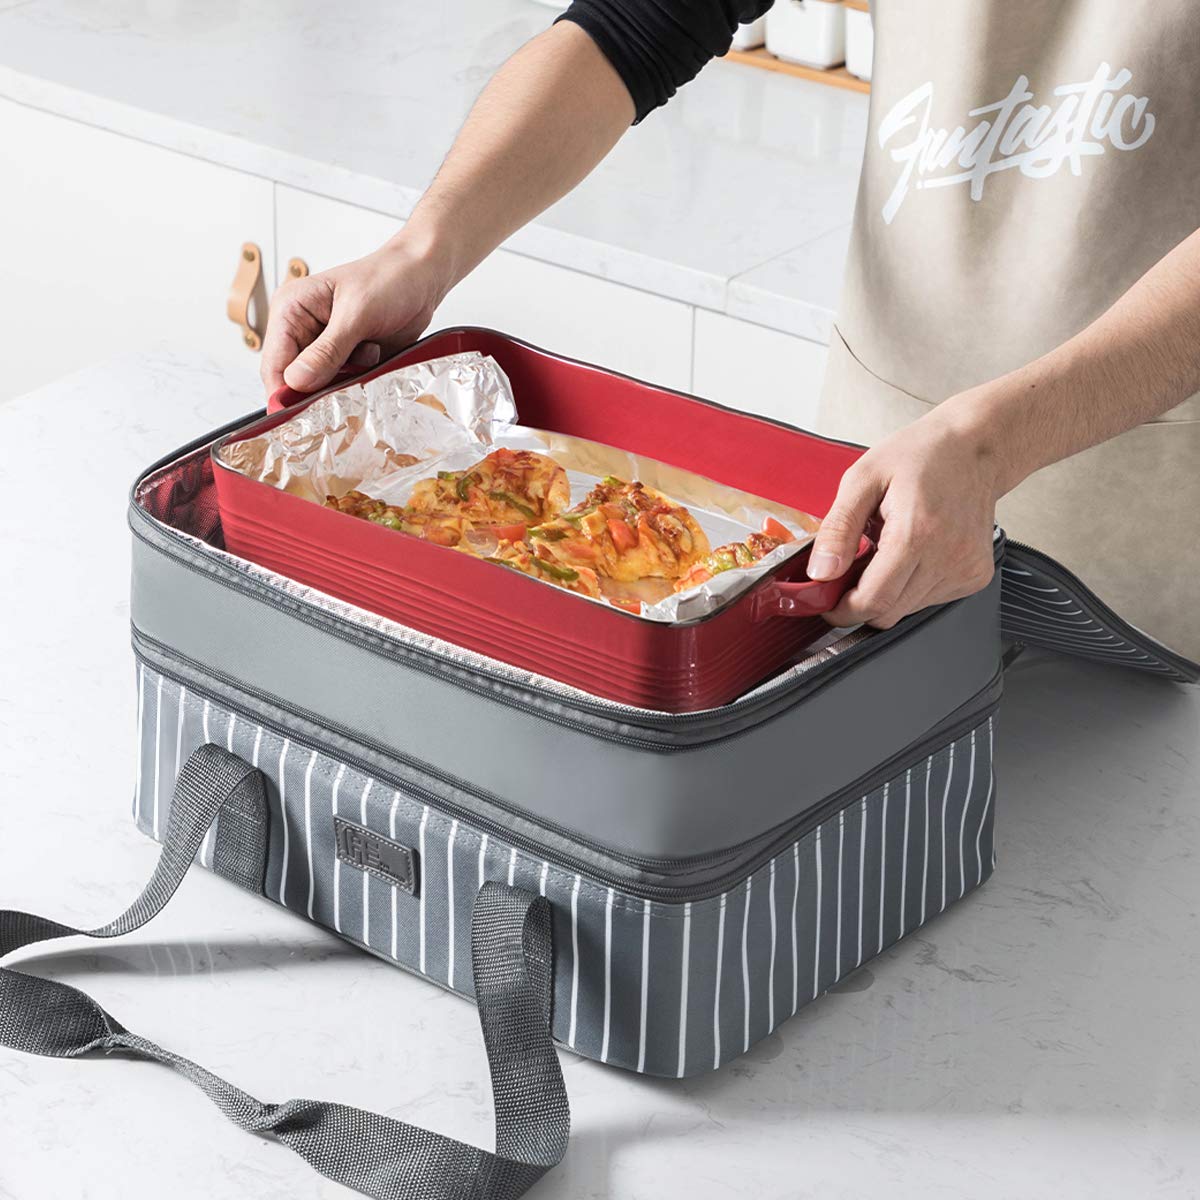 FE Casserole Carrier, Expandable Insulated Casserole Carriers for Hot or Cold Food, Lasagna Lugger for Parties, Fits 9" x 13" Baking Dish, Grey